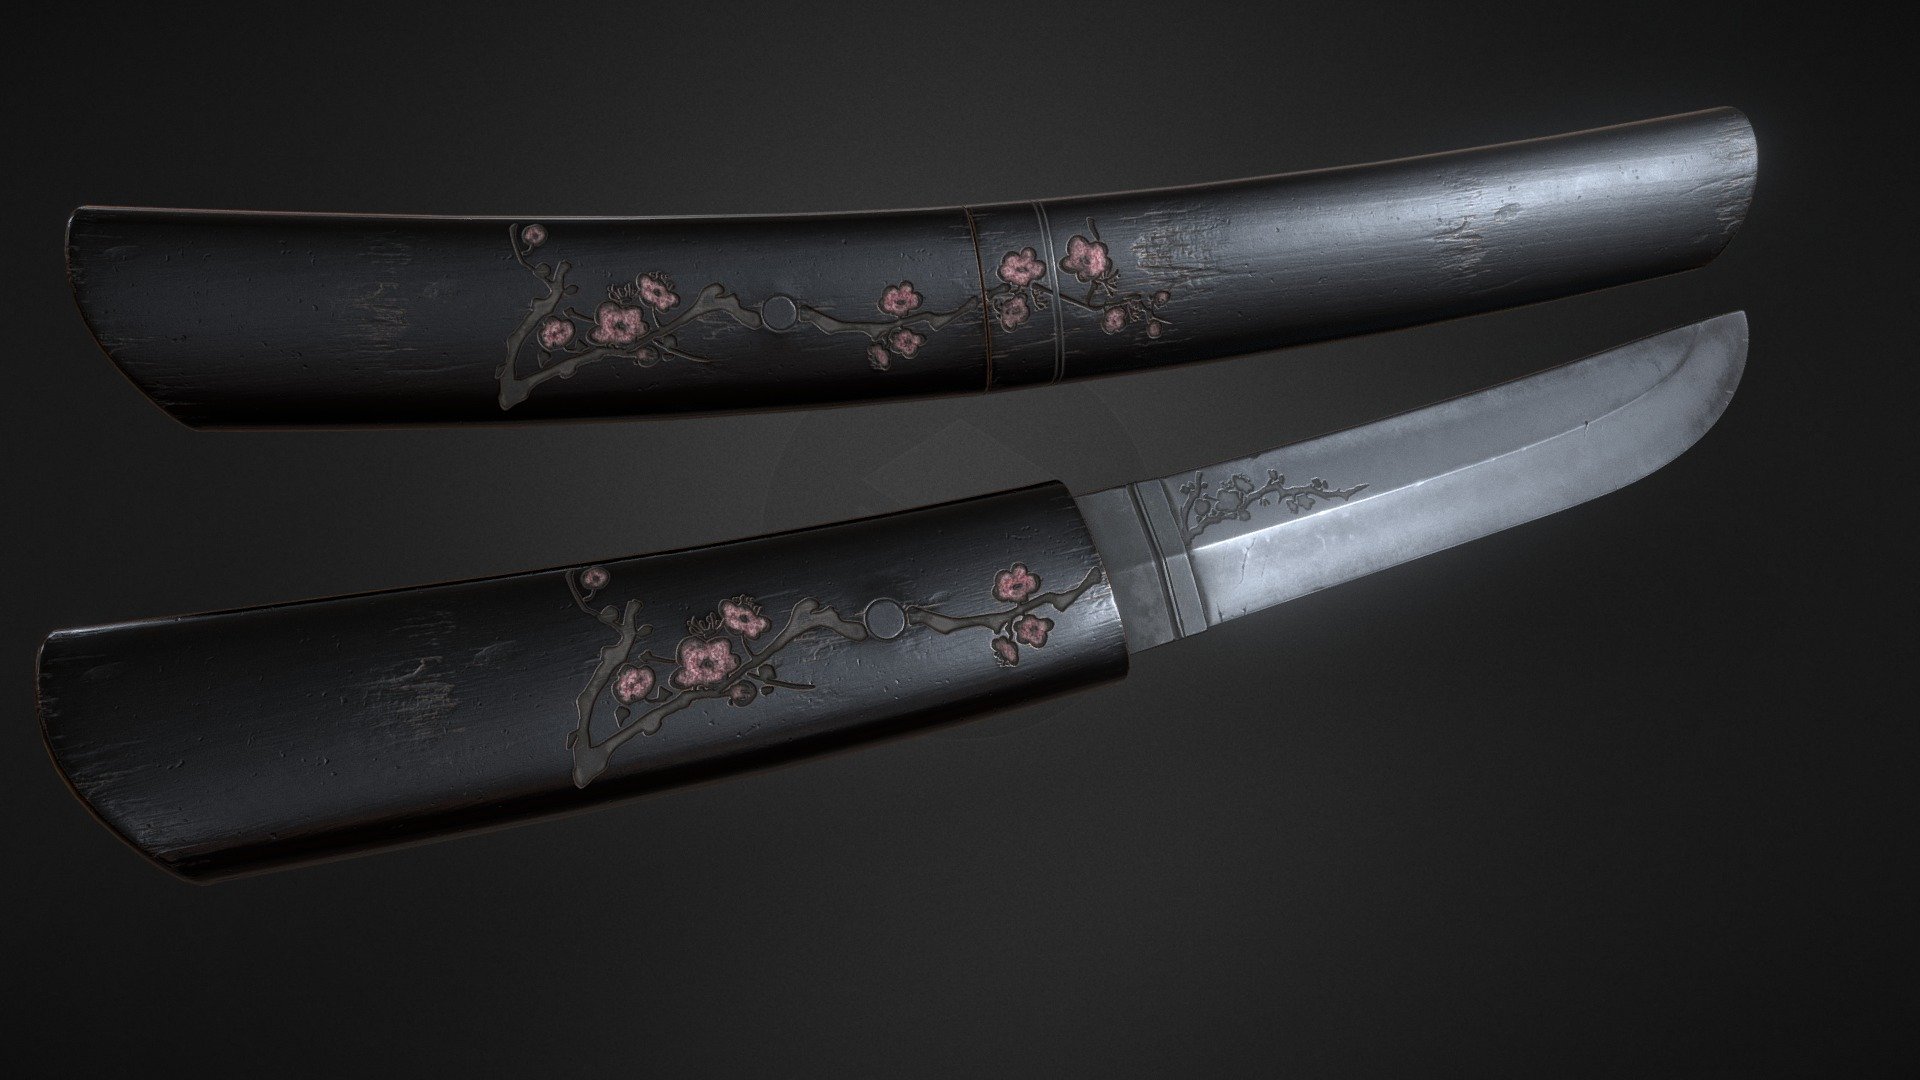 Old tanto low poly model.

4k textures. Total polycount 2110 tris.

Model created on Blender and ZBrush. Textured with Substance Painter 3d model